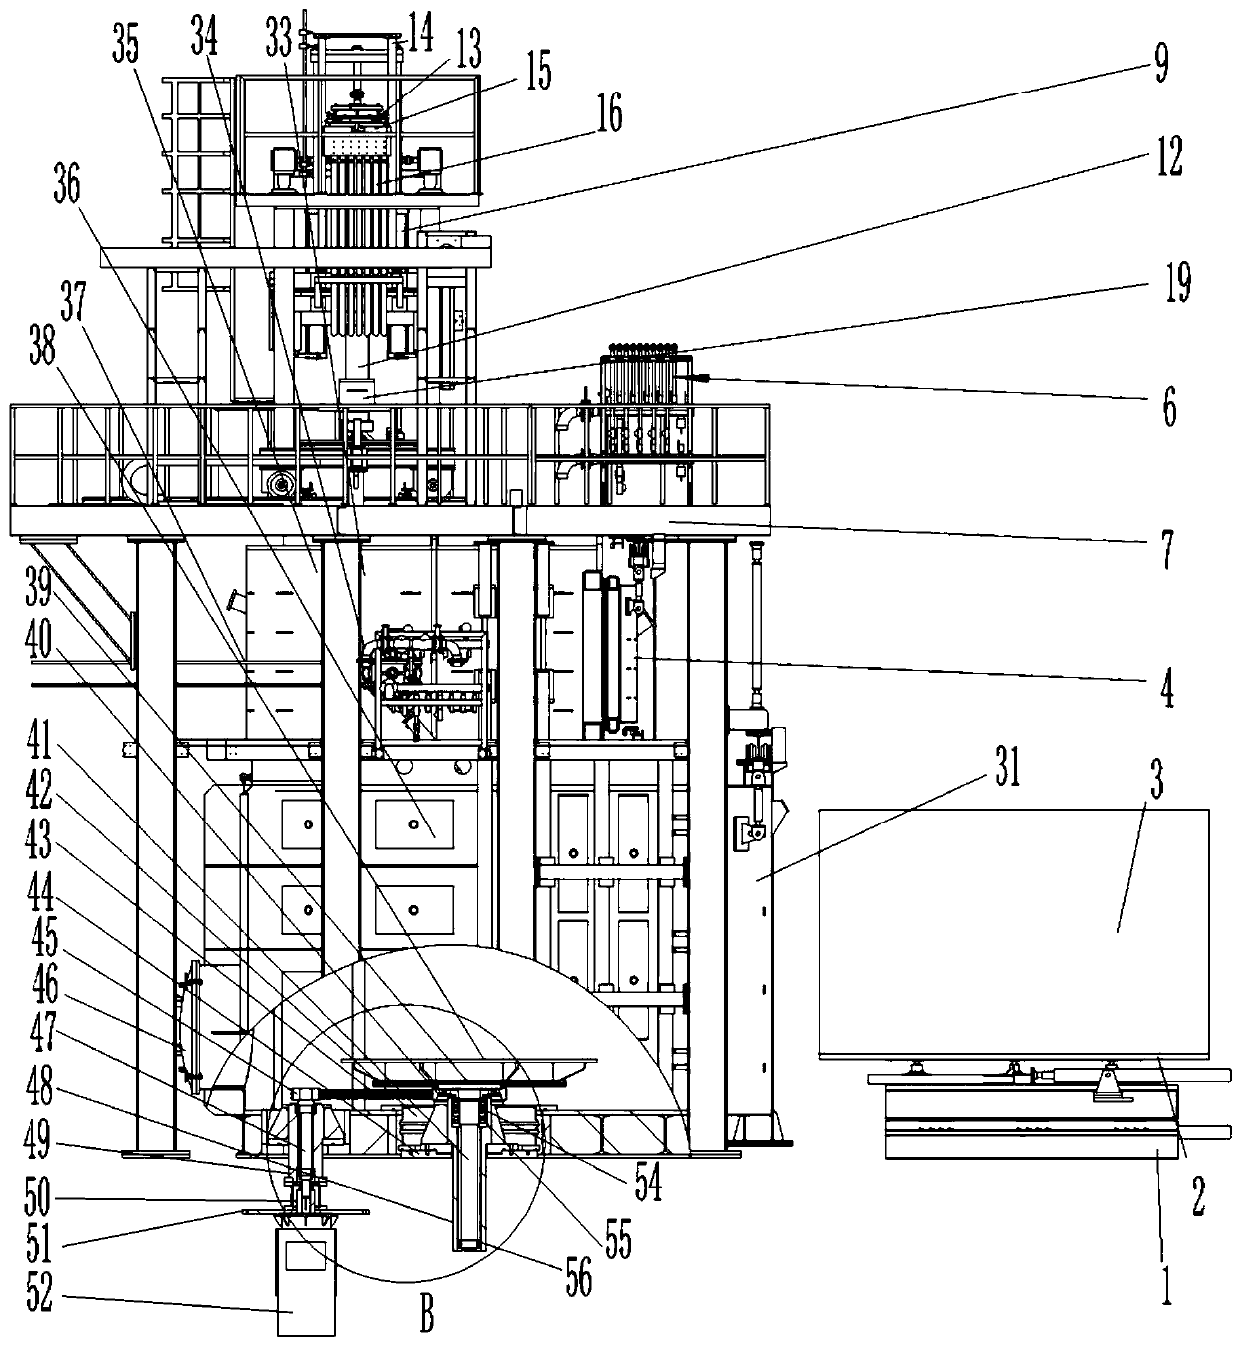 Double-chamber u-shaped furnace body system for shell solidification furnace